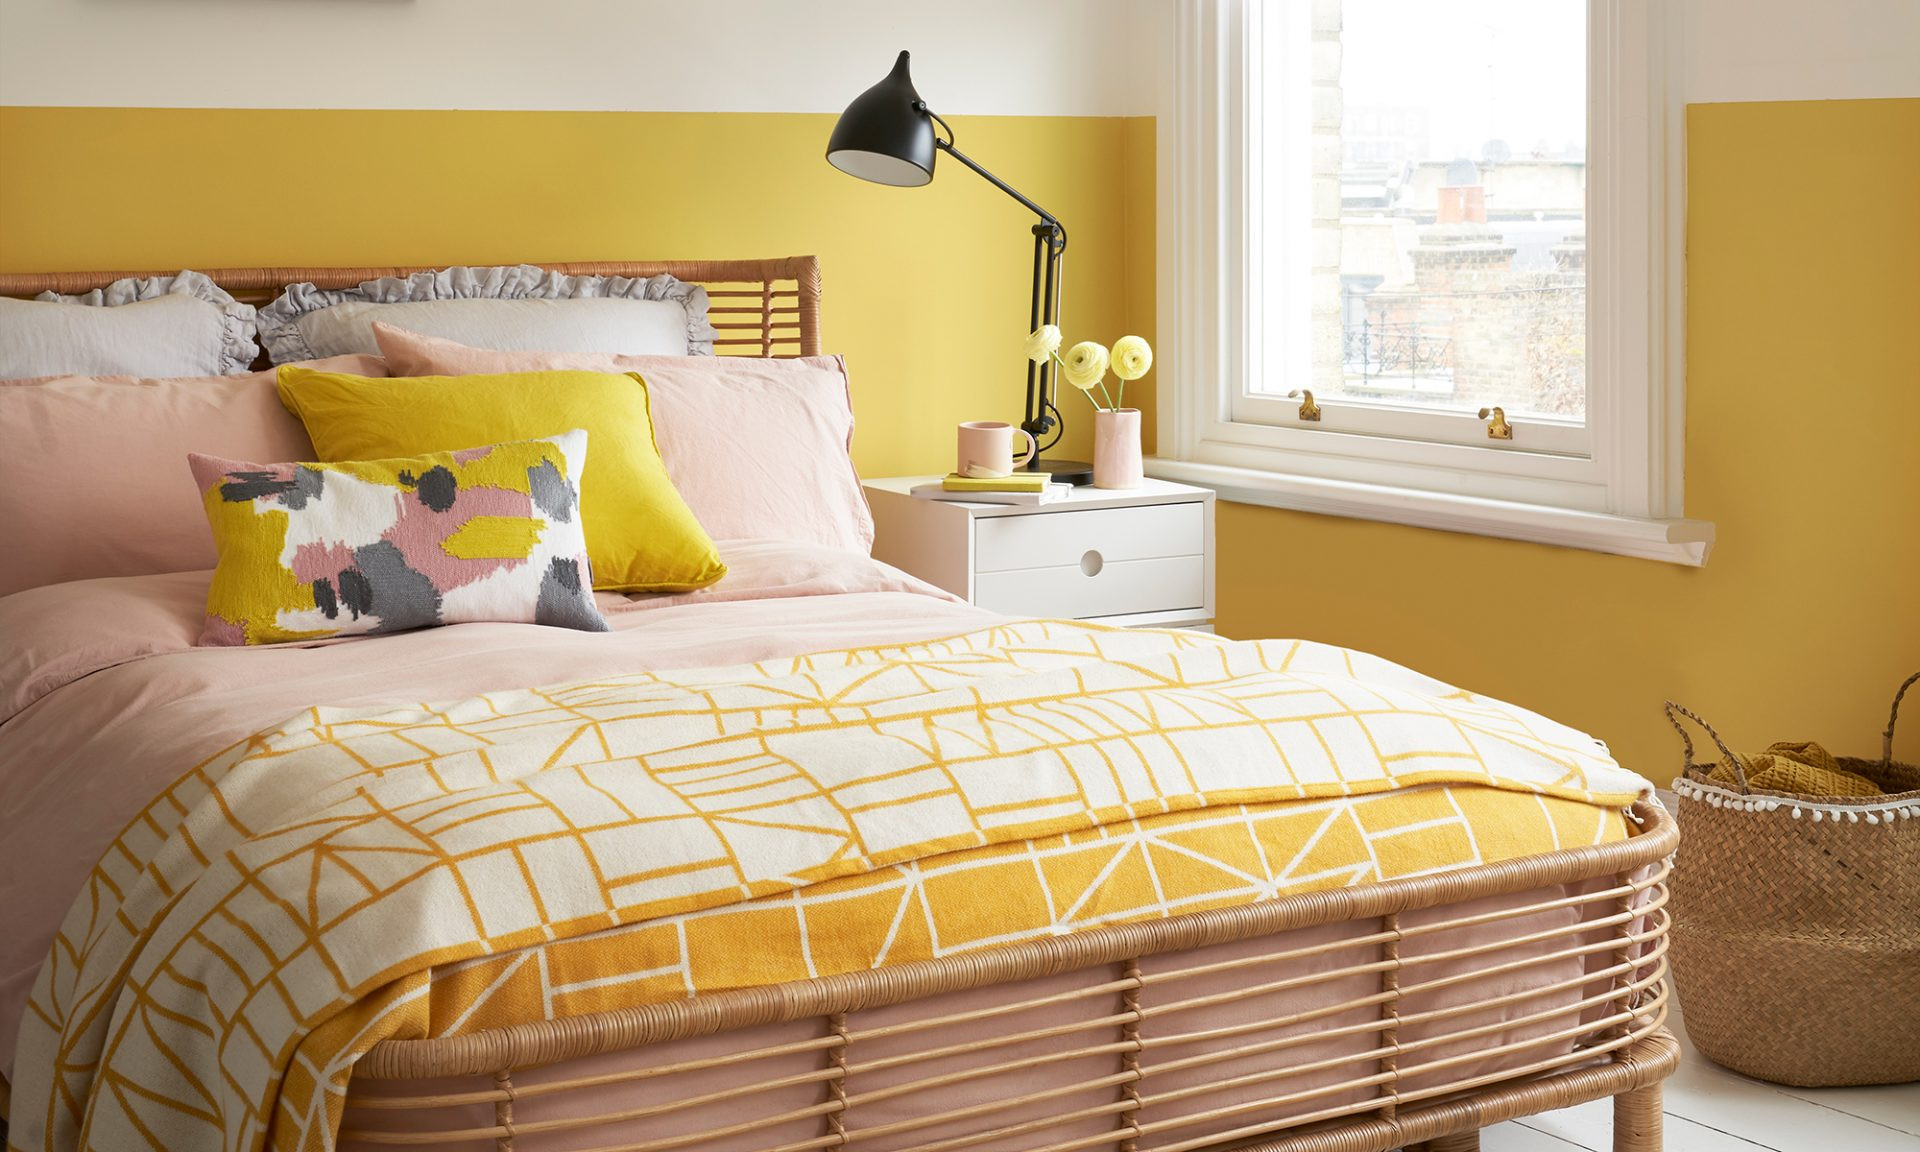 Yellow Walls Bedroom
 Yellow bedroom ideas for sunny mornings and sweet dreams